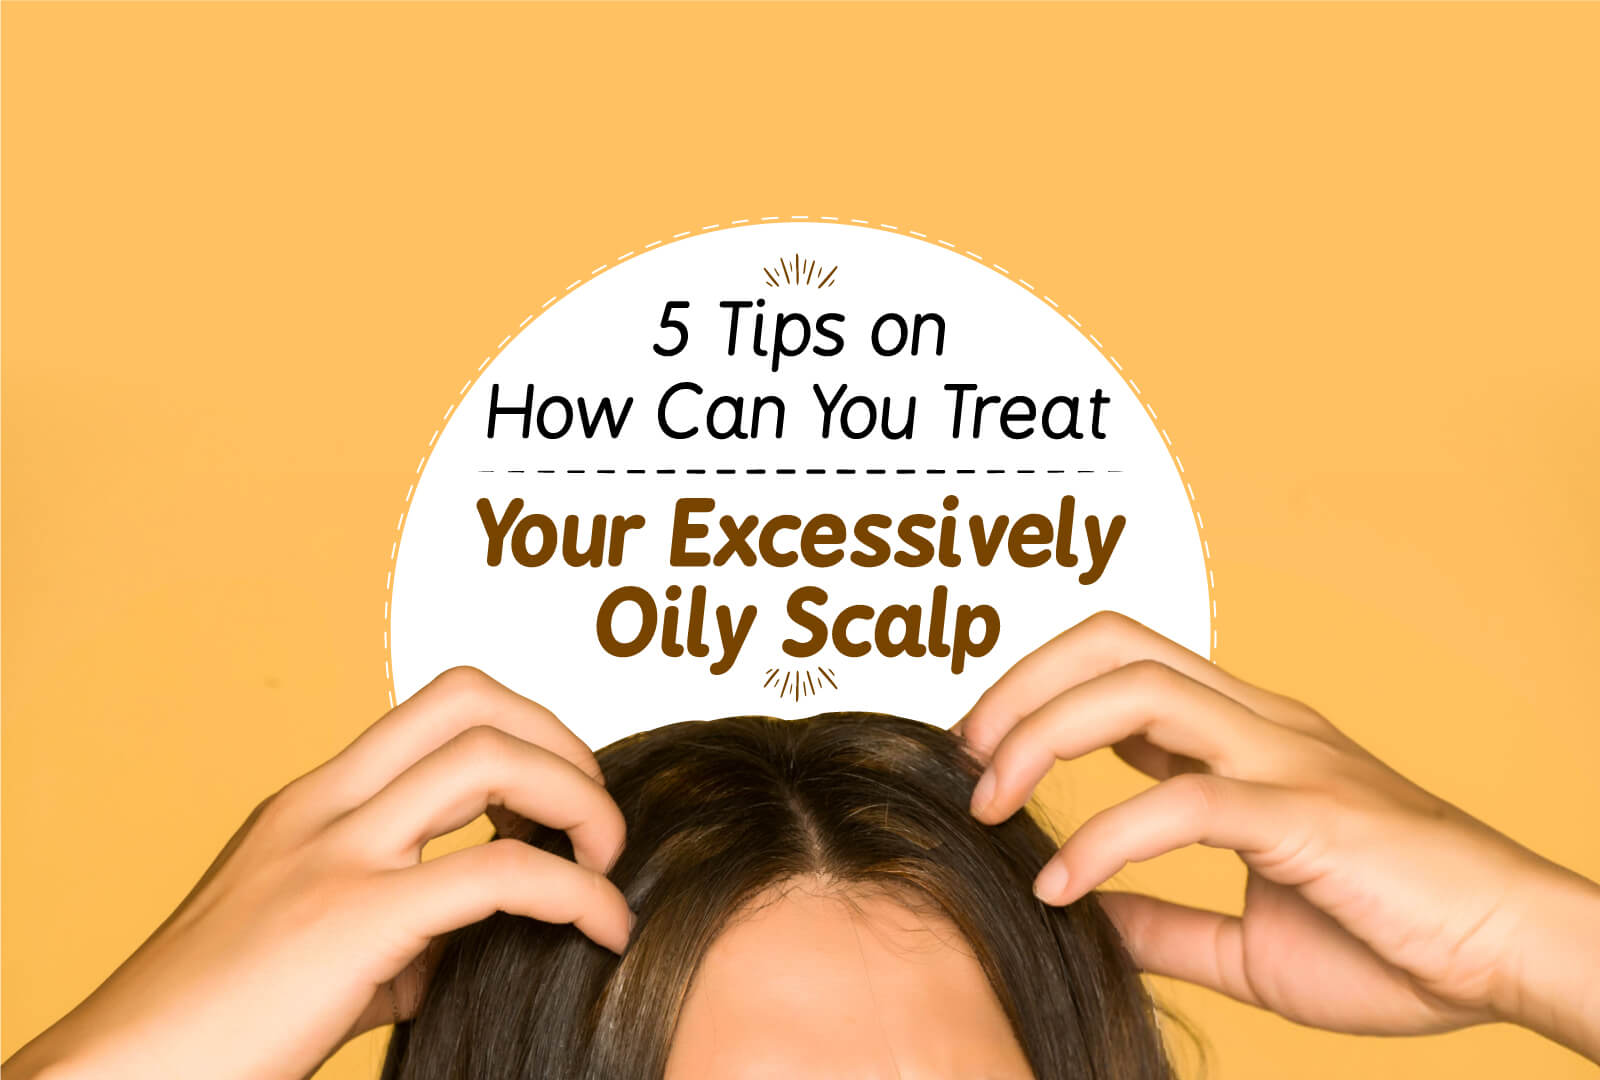 5 TIPS ON HOW CAN YOU TREAT YOUR EXCESSIVELY OILY SCALP